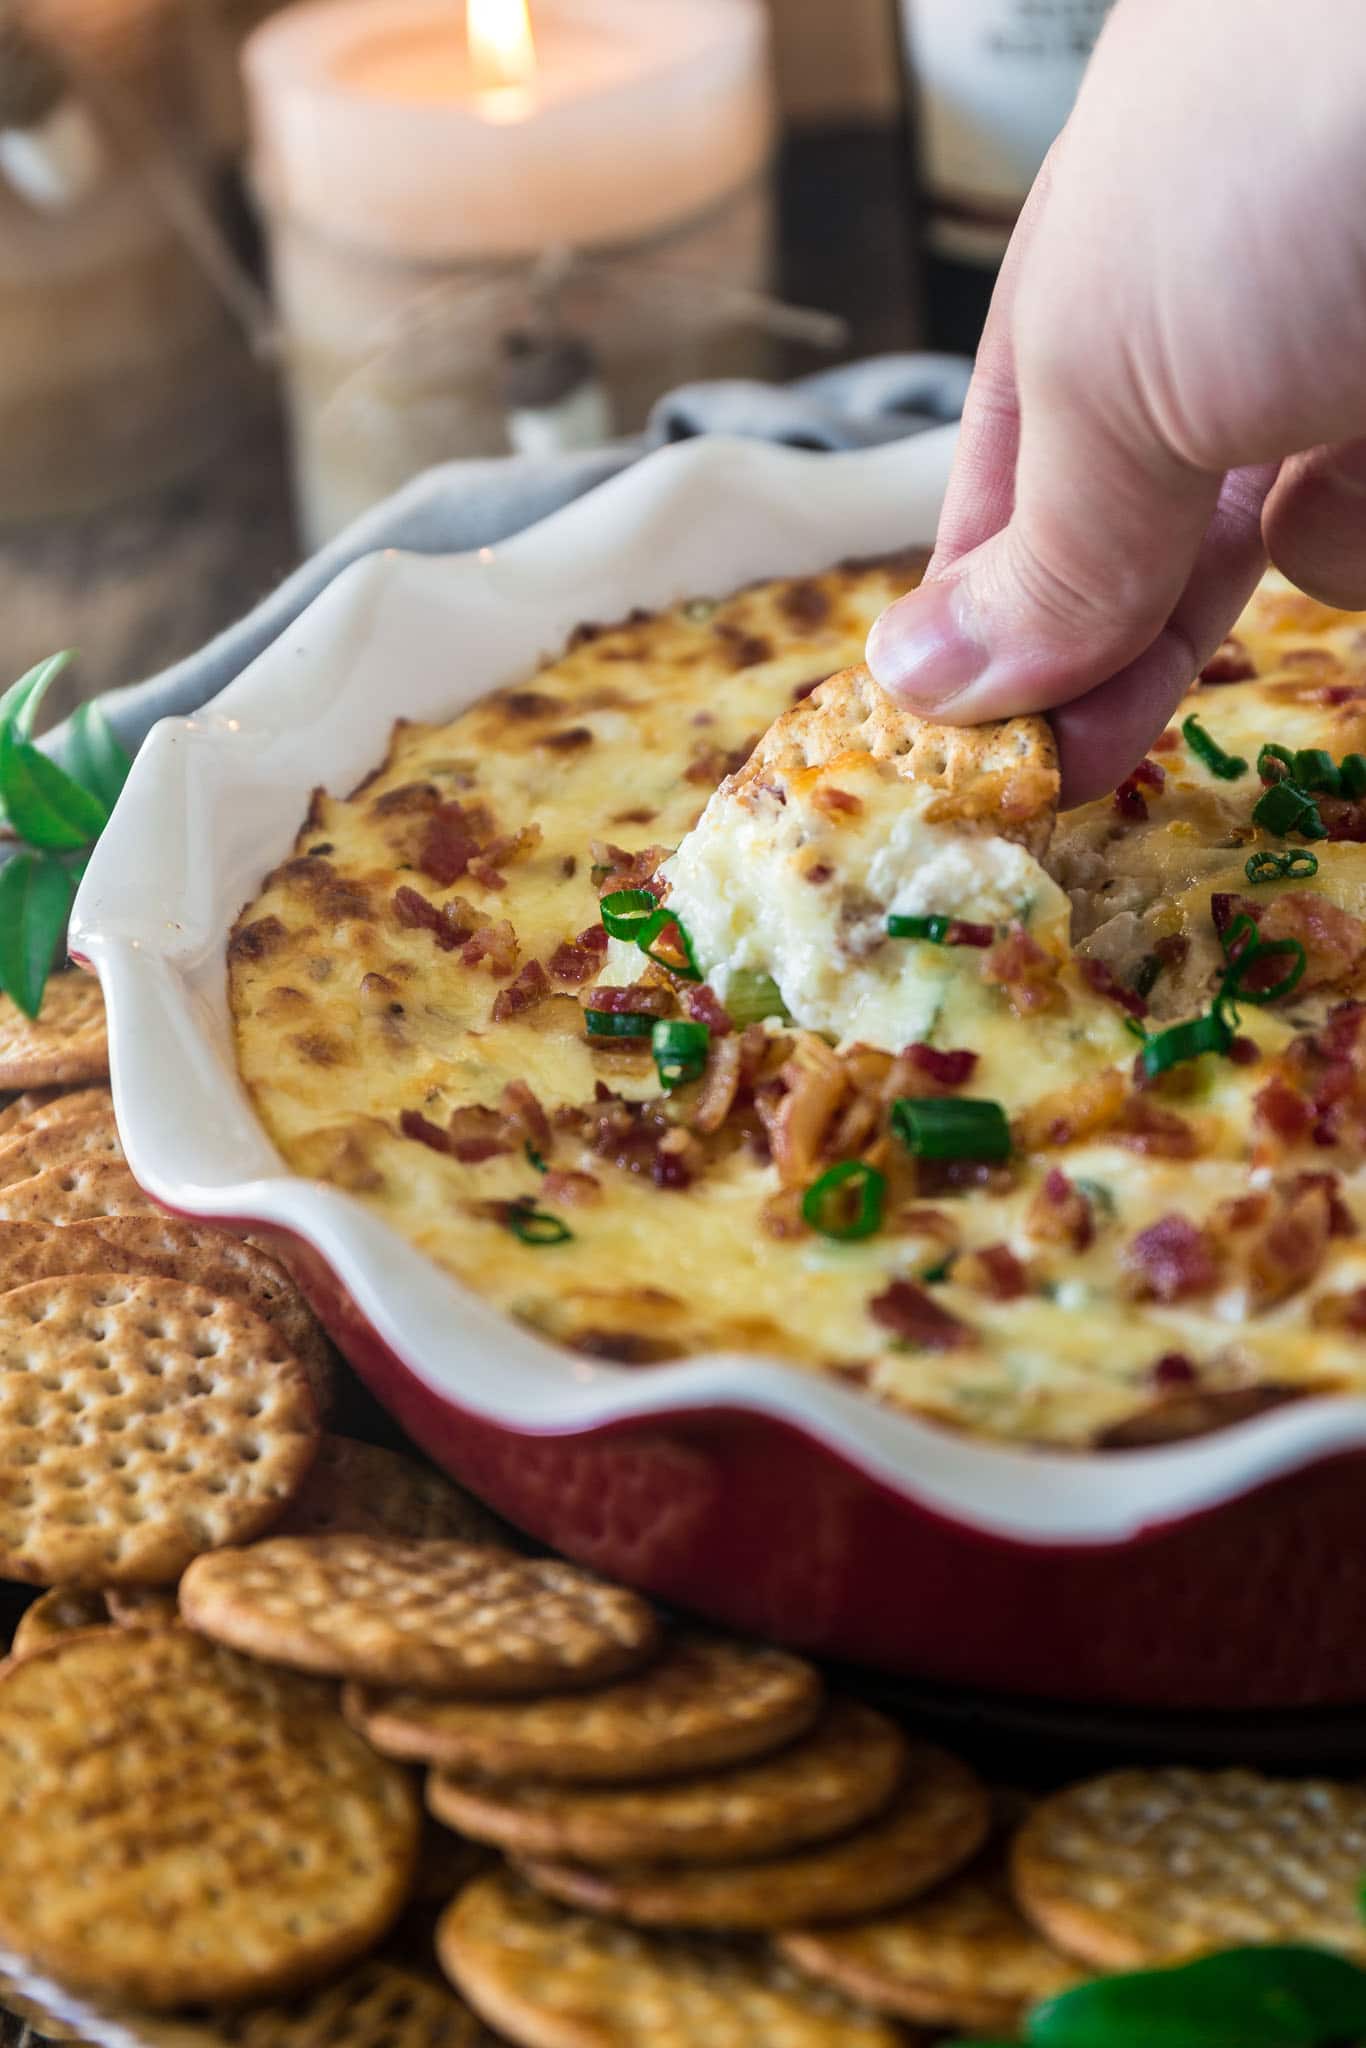 Hot Smoked Gouda Bacon Dip | www.oliviascuisine.com | Creamy, gooey and loaded with everyone's favorite ingredient, bacon, this Hot Smoked Gouda Bacon Dip is destined to be the star of your holiday party! Pair it with some good wine and you're on the road to success.